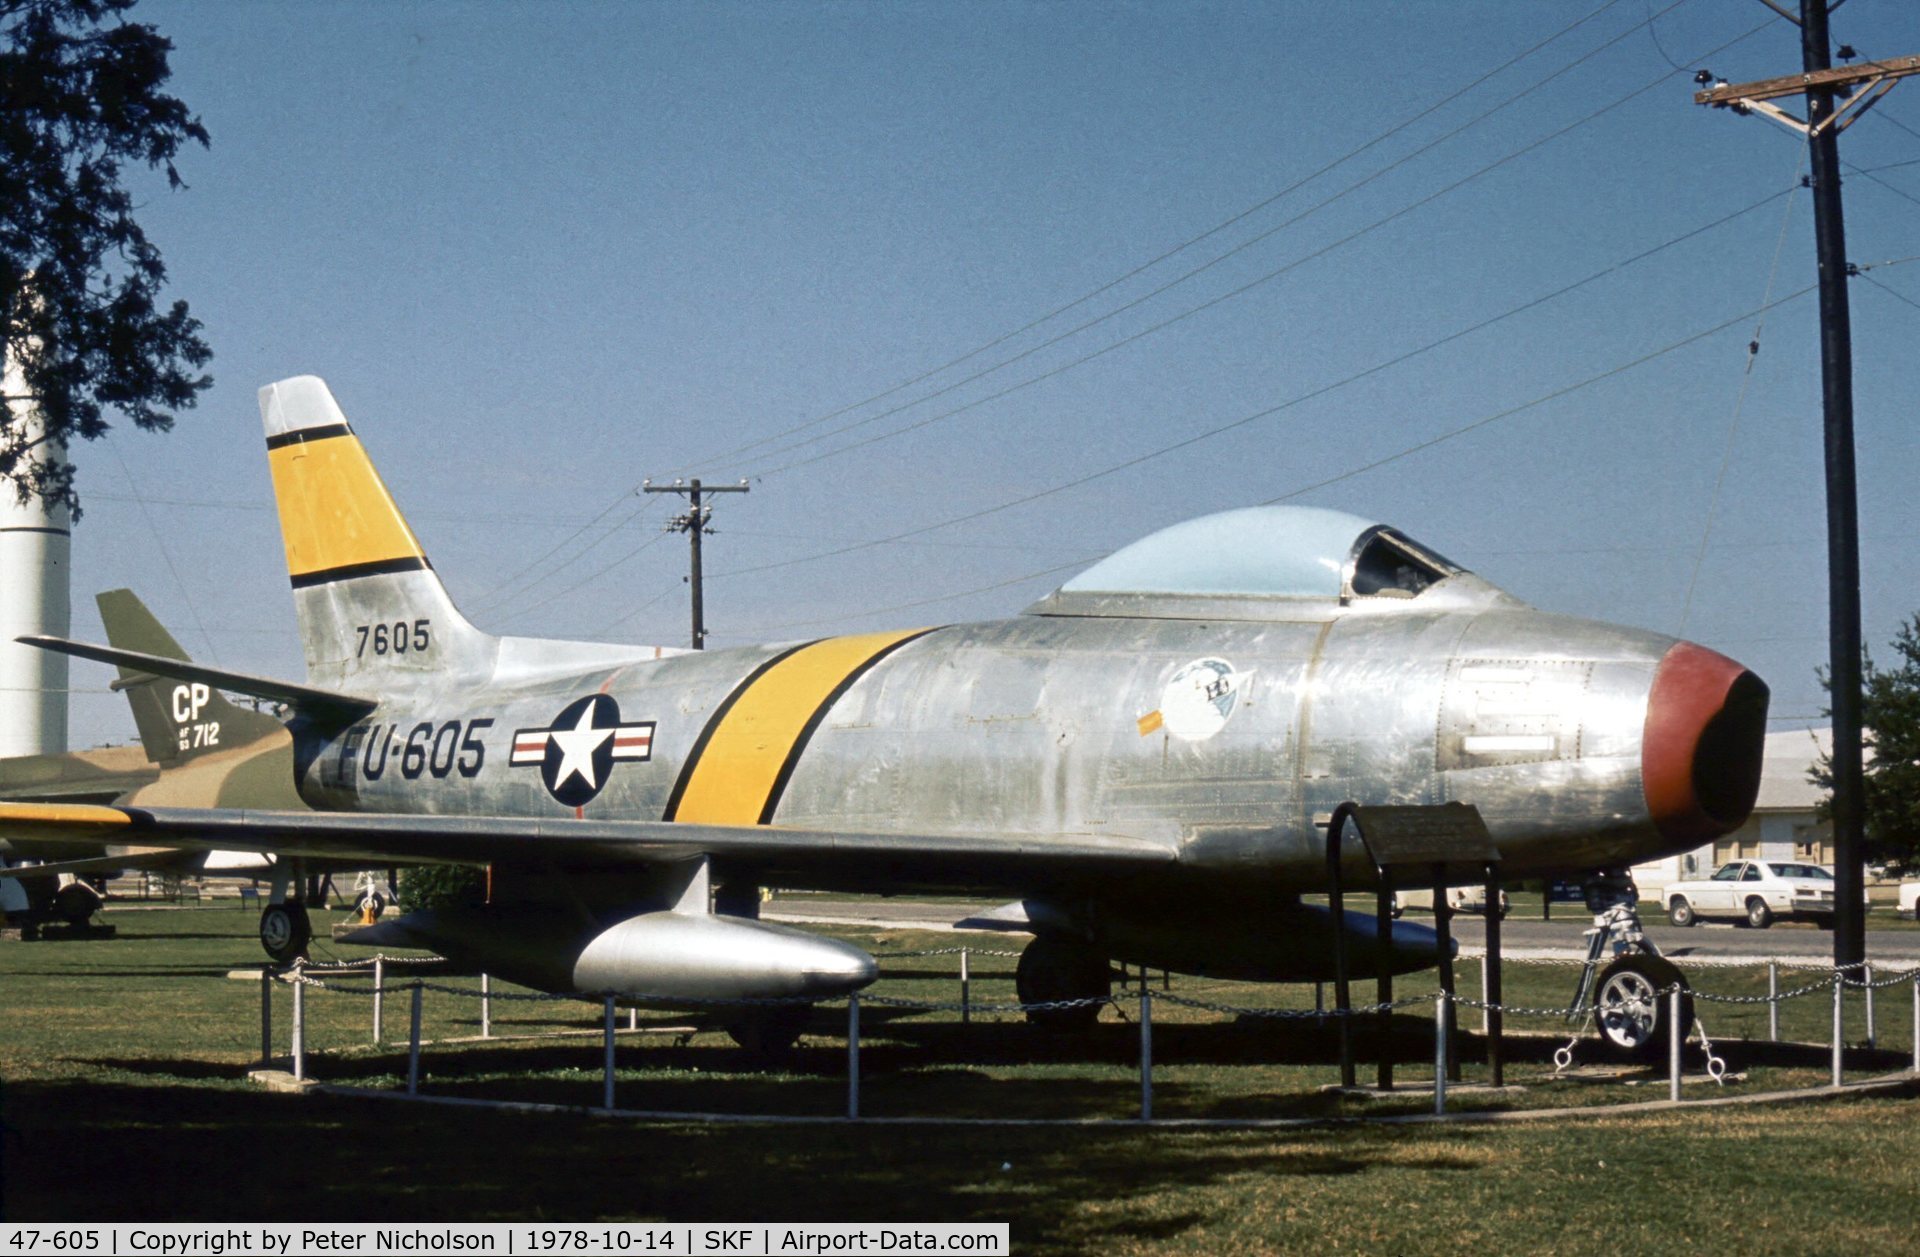 47-605, 1947 North American F-86A Sabre C/N 151-38432, F-86A Sabre in the USAF History & Traditions Museum at Lackland AFB in 1978.